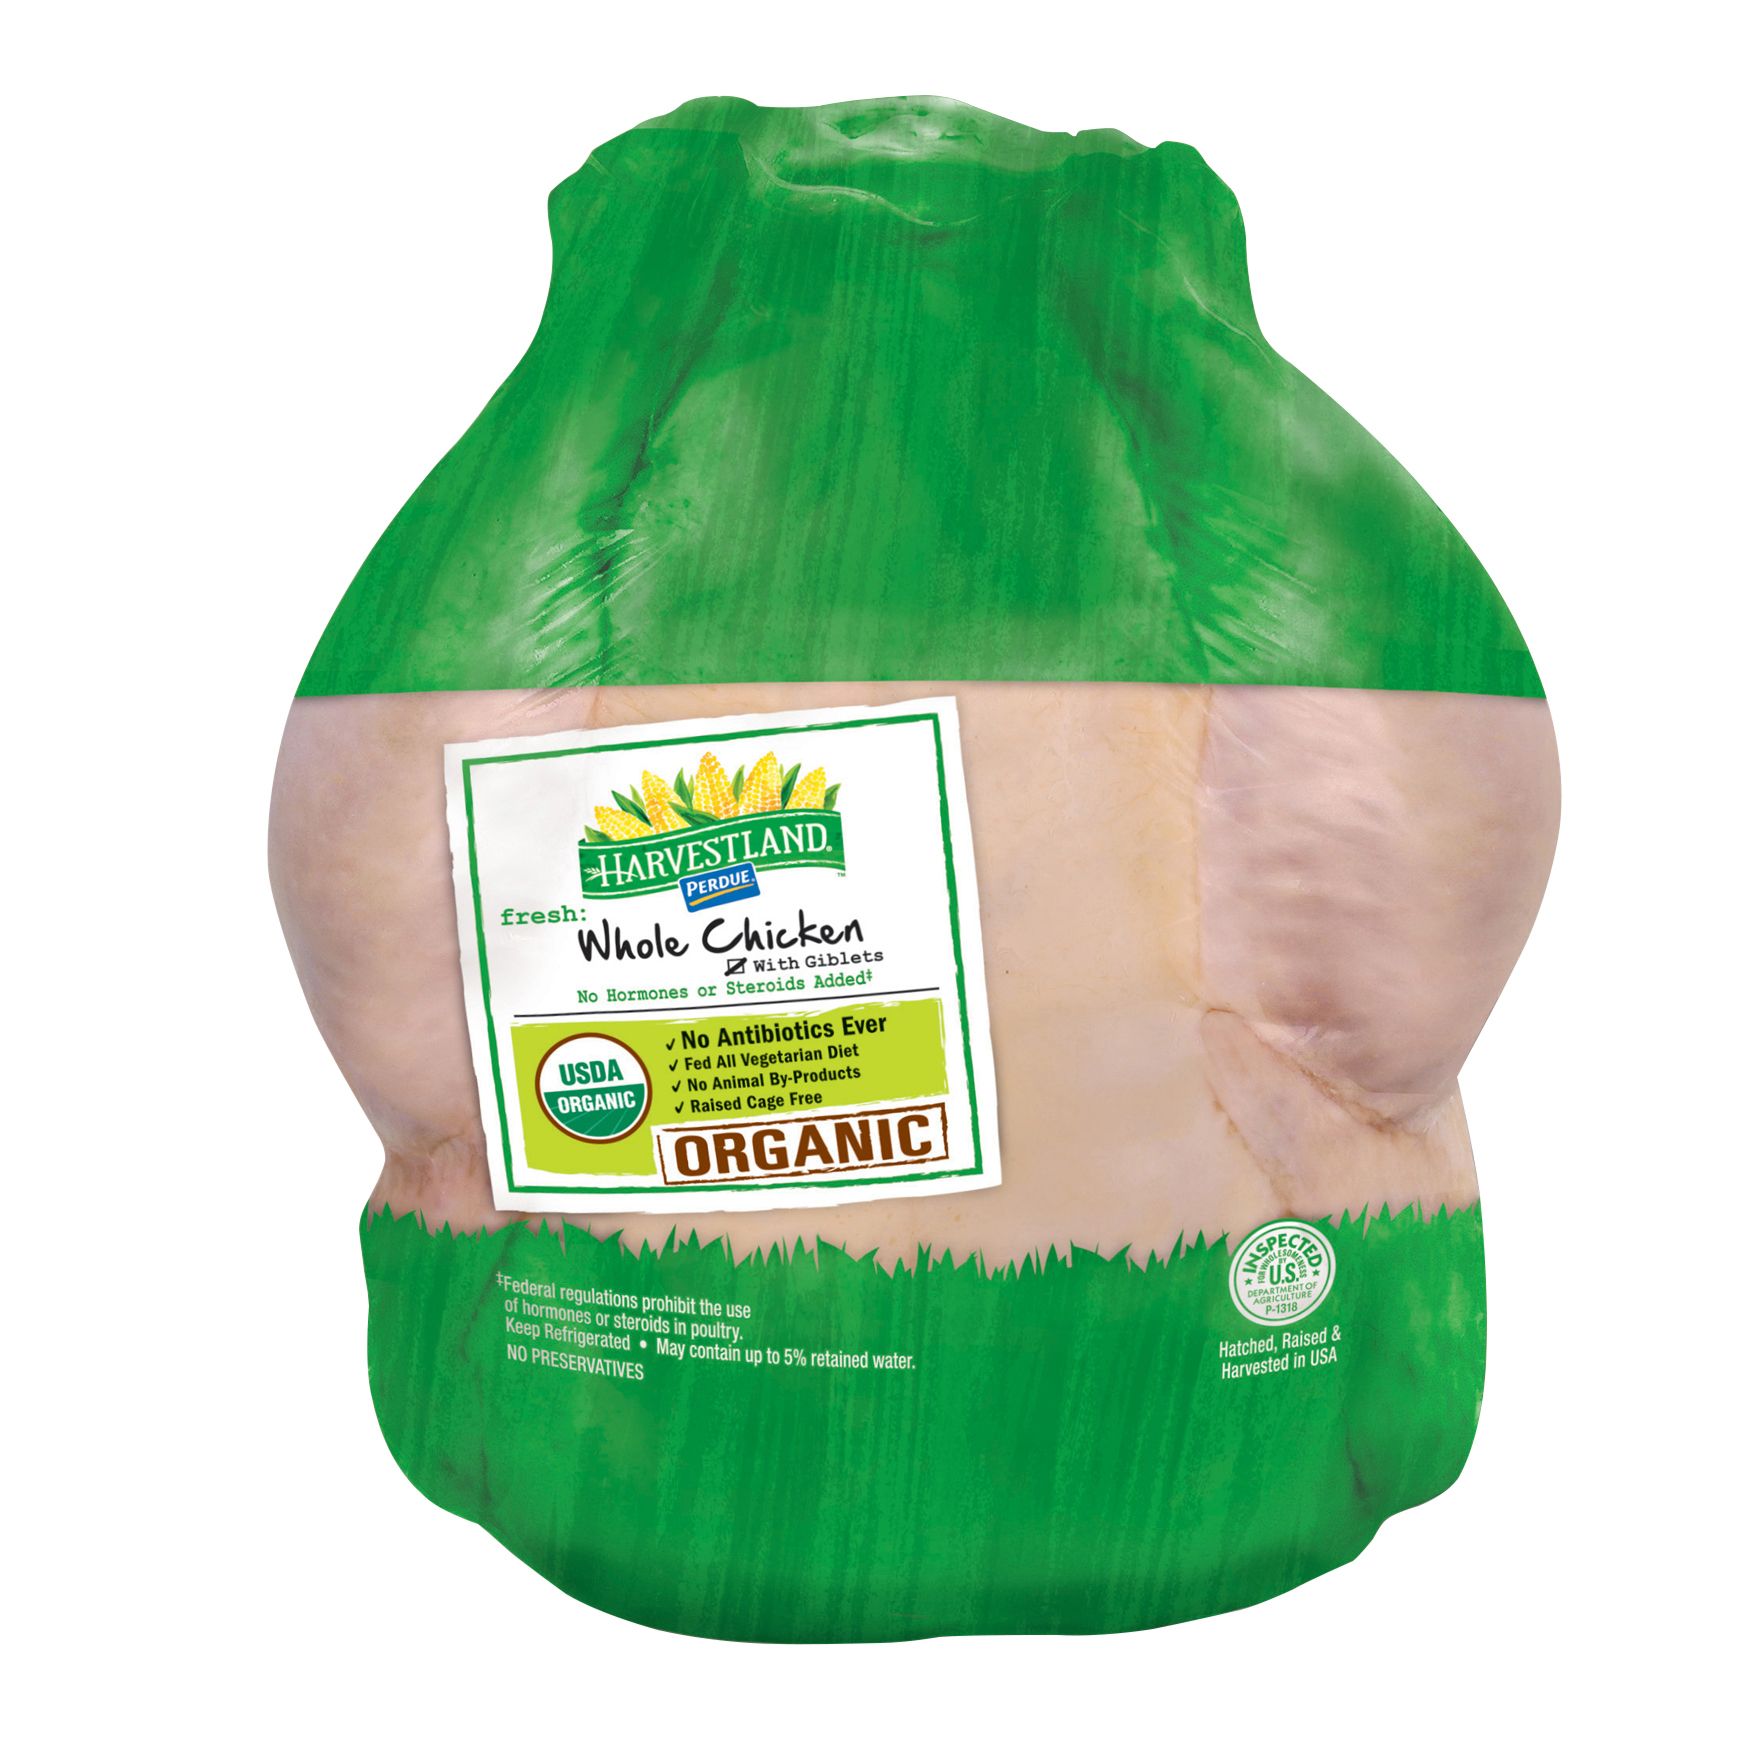 Organic Whole Young Chicken with Giblets